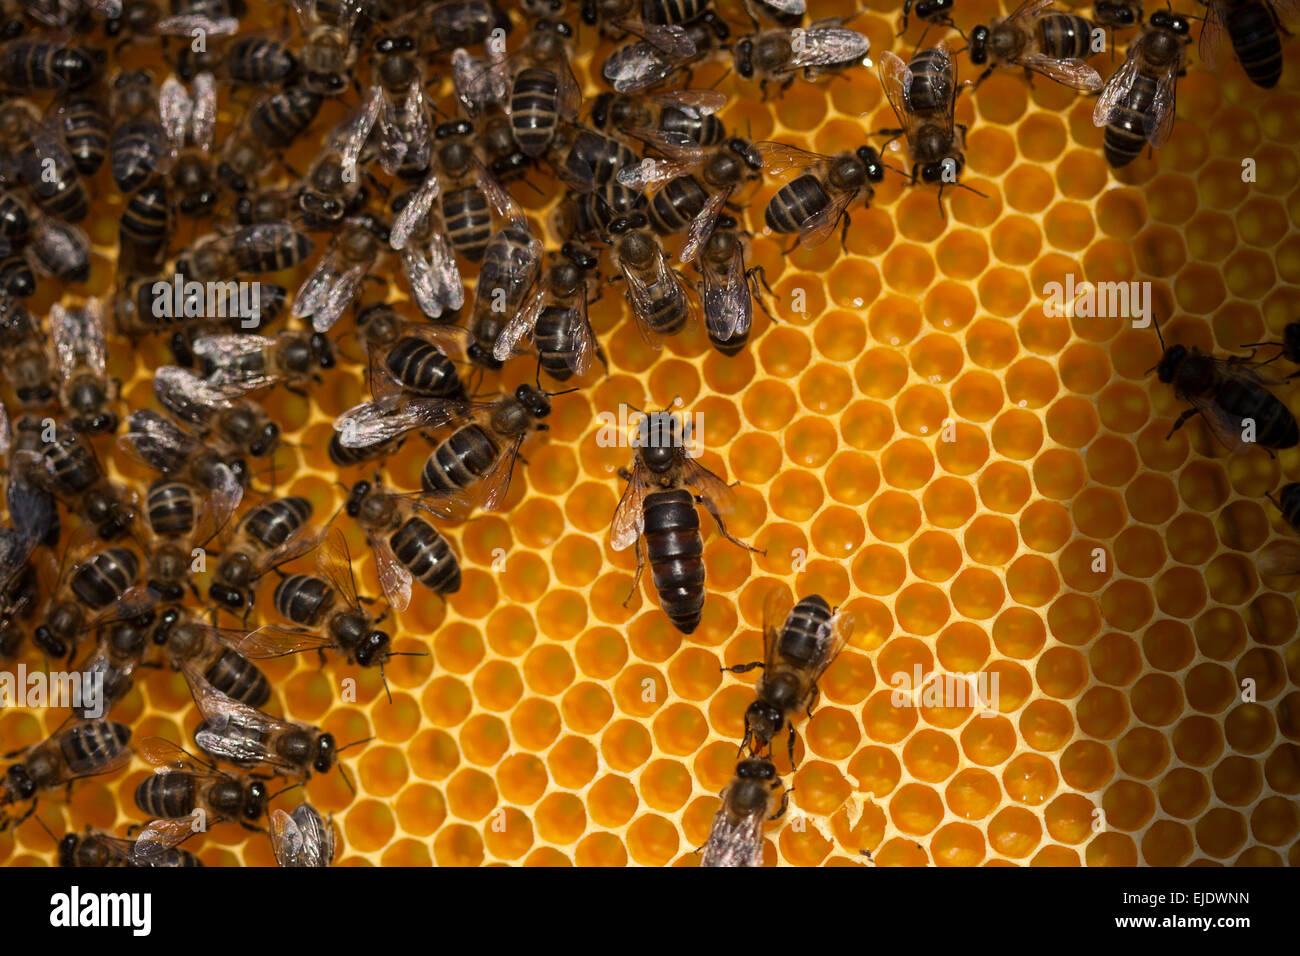 A queen bee walks in the center of a beehive of the apiary of Puremiel beekeepers in Arcos de la Frontera, Cadiz province, Stock Photo